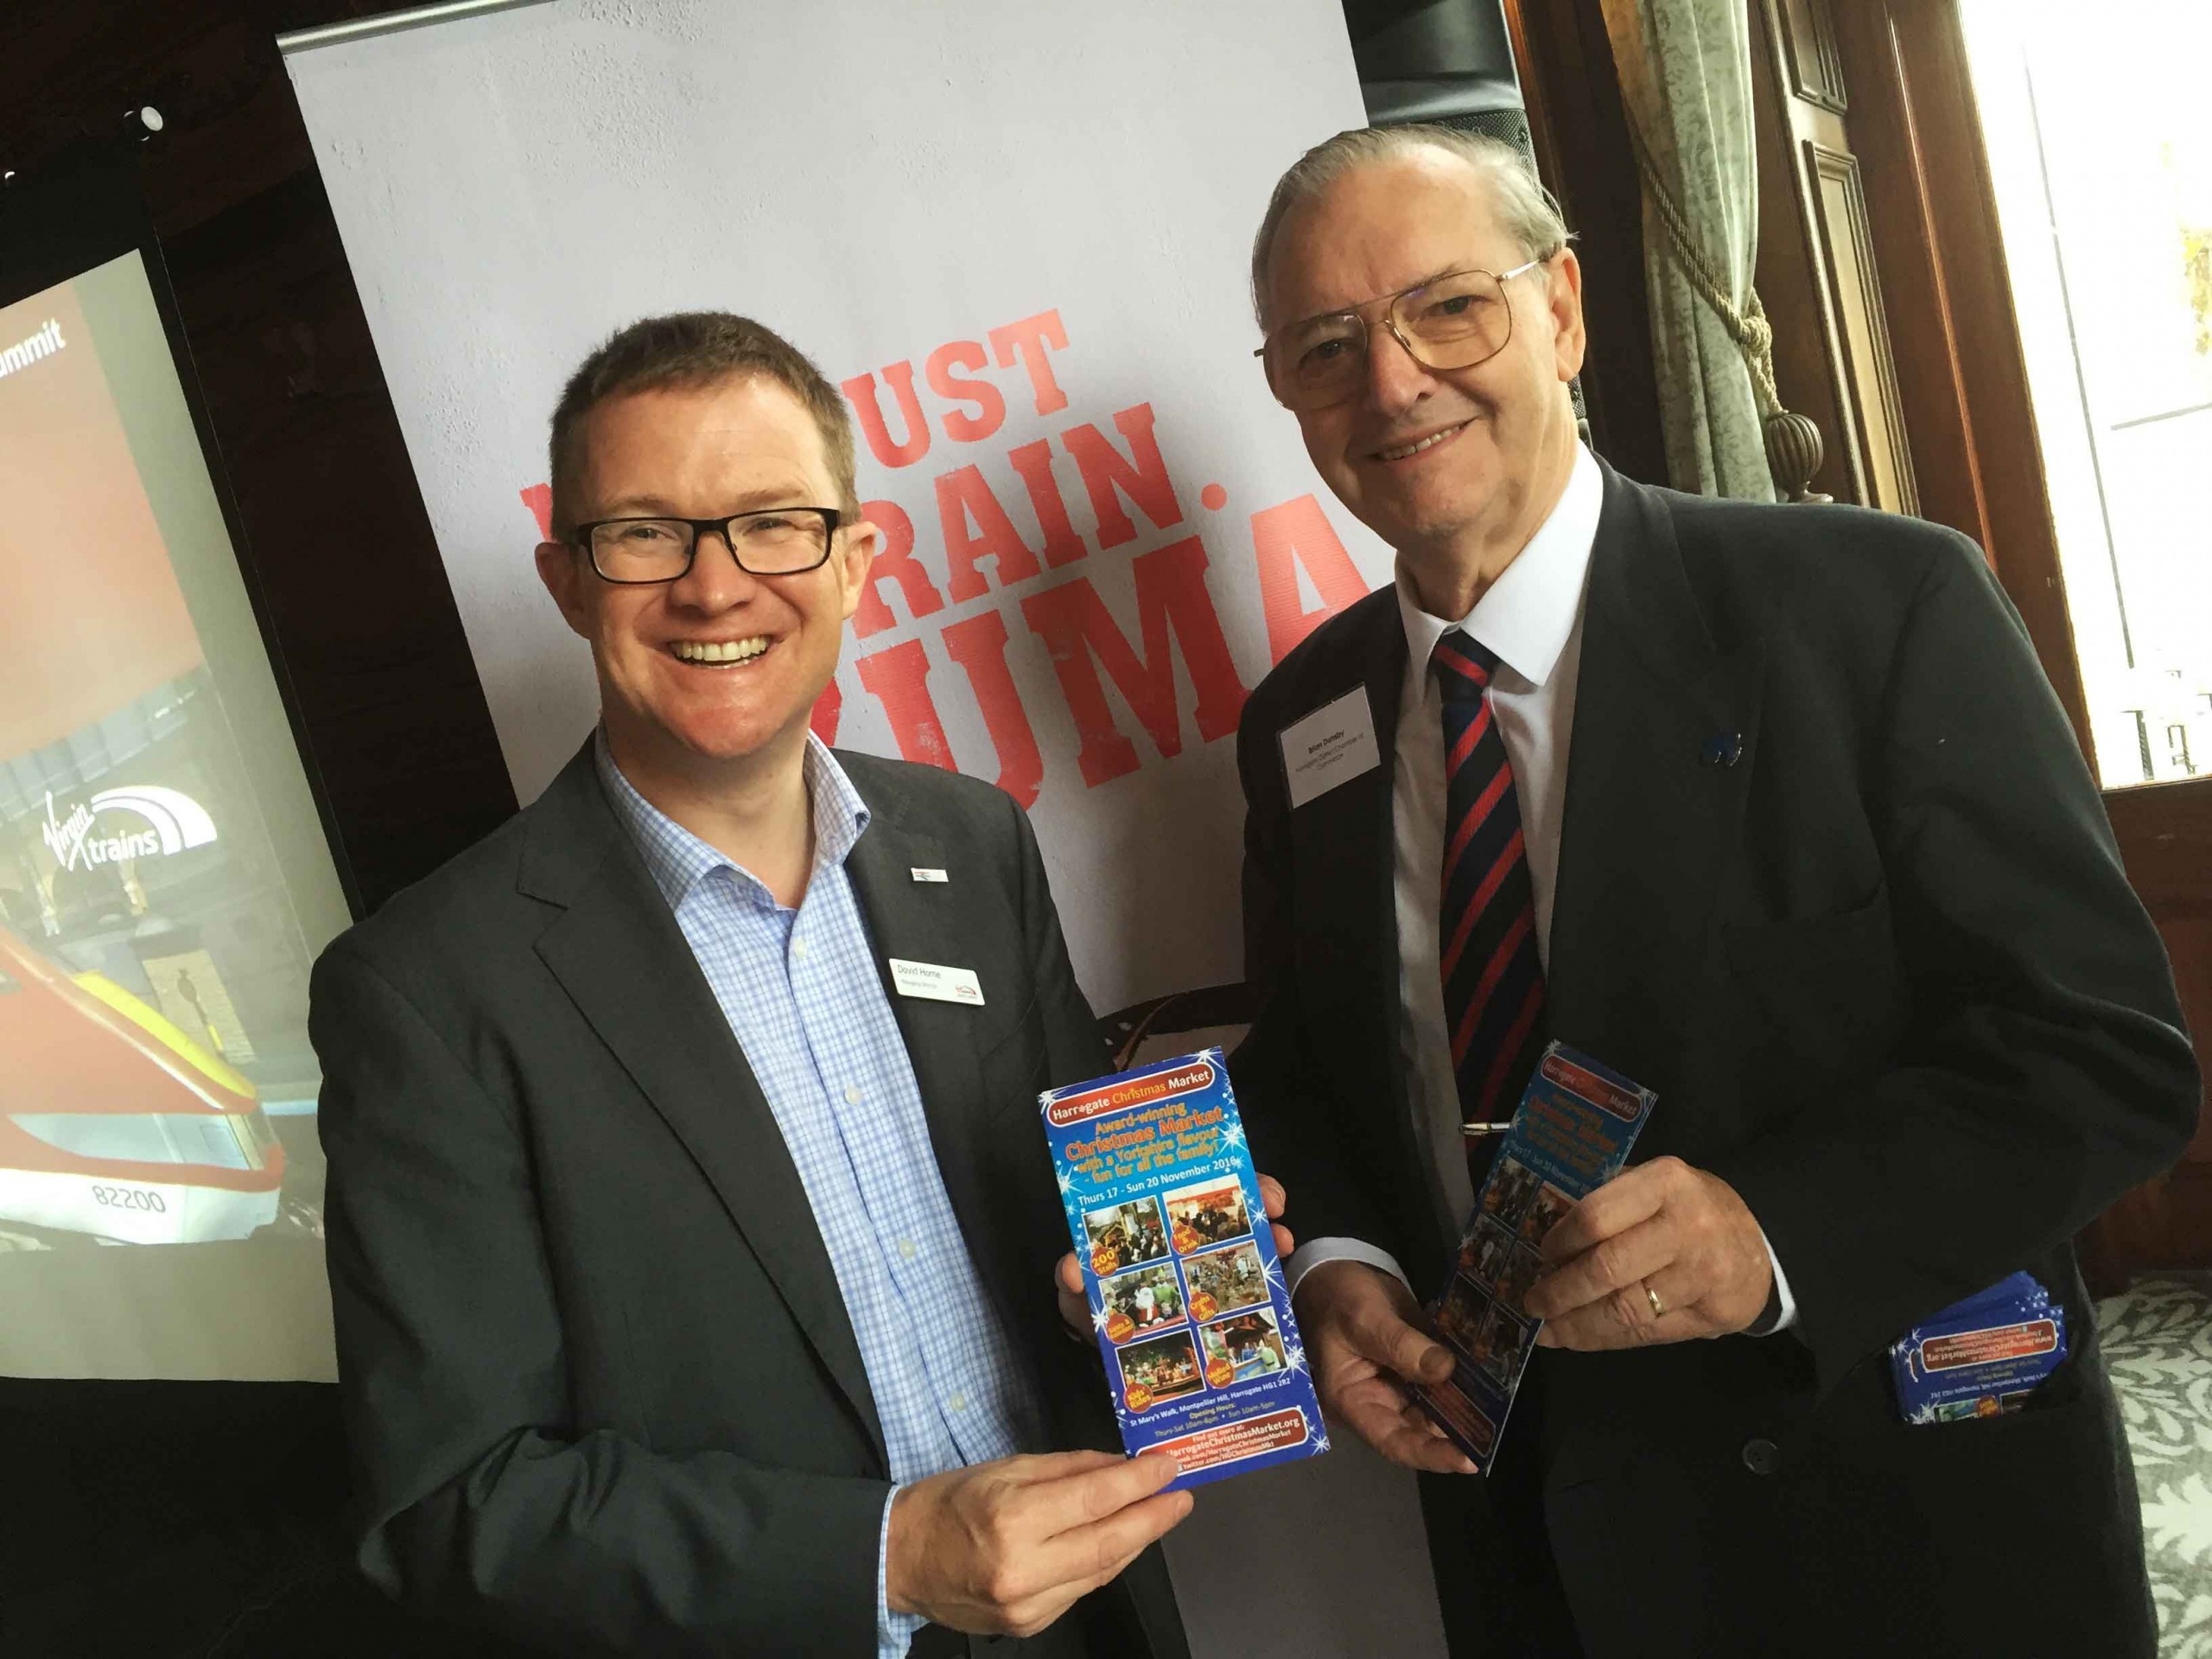 David Horne, managing director of Virgin Trains East Coast, announces the launch of special services from London to Harrogate for the annual Harrogate Christmas Market, with event organiser Brian Dunsby.